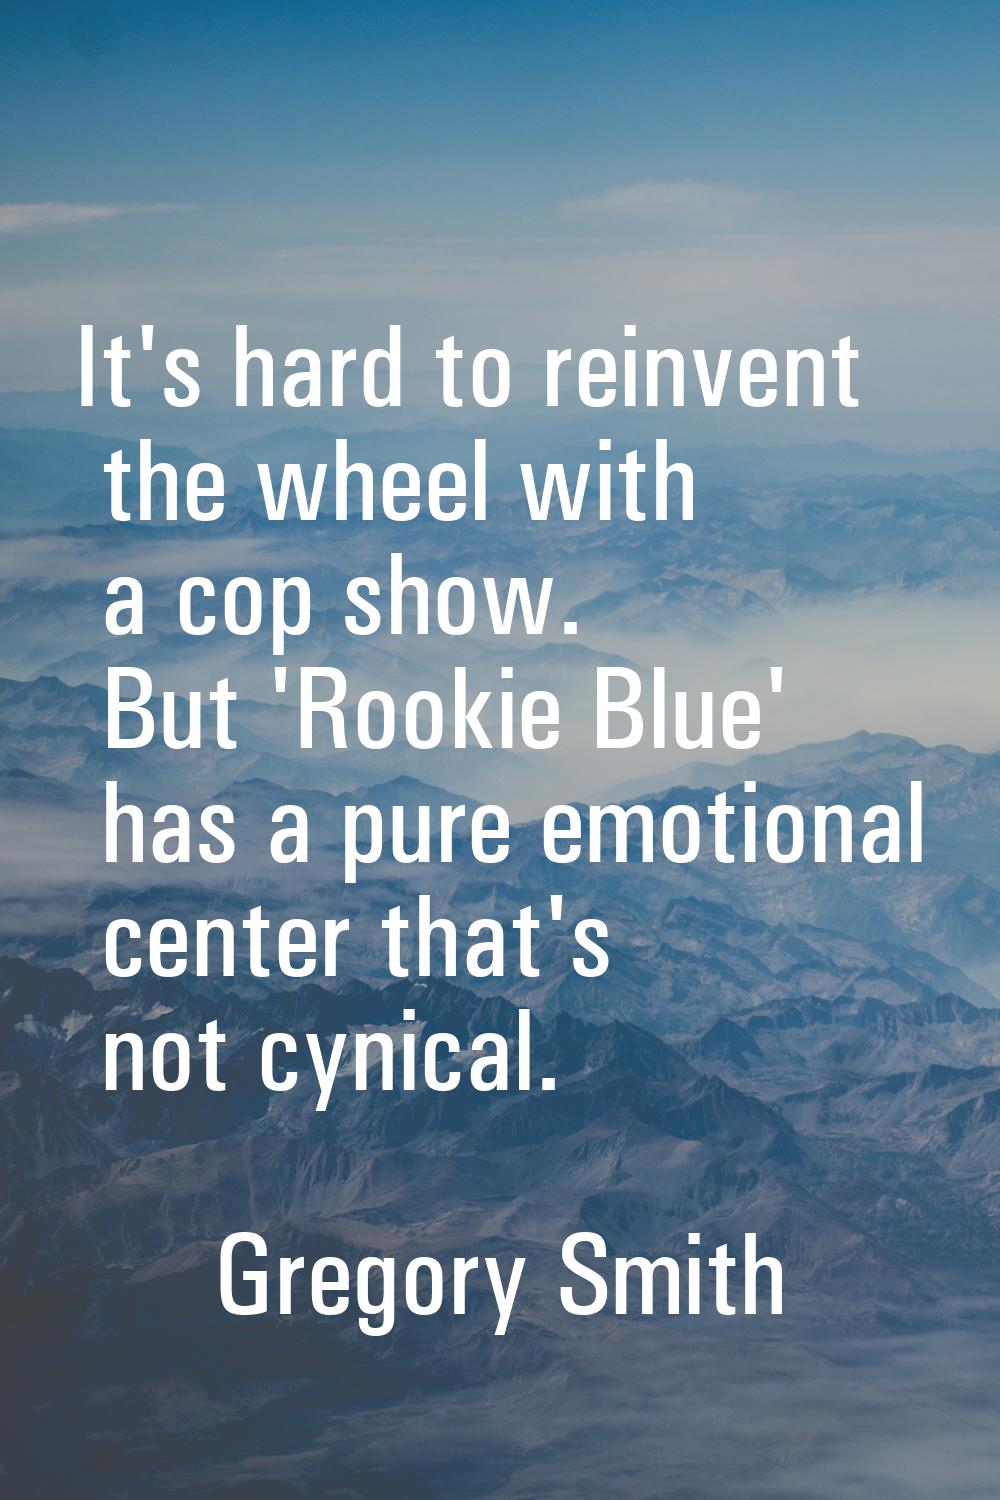 It's hard to reinvent the wheel with a cop show. But 'Rookie Blue' has a pure emotional center that